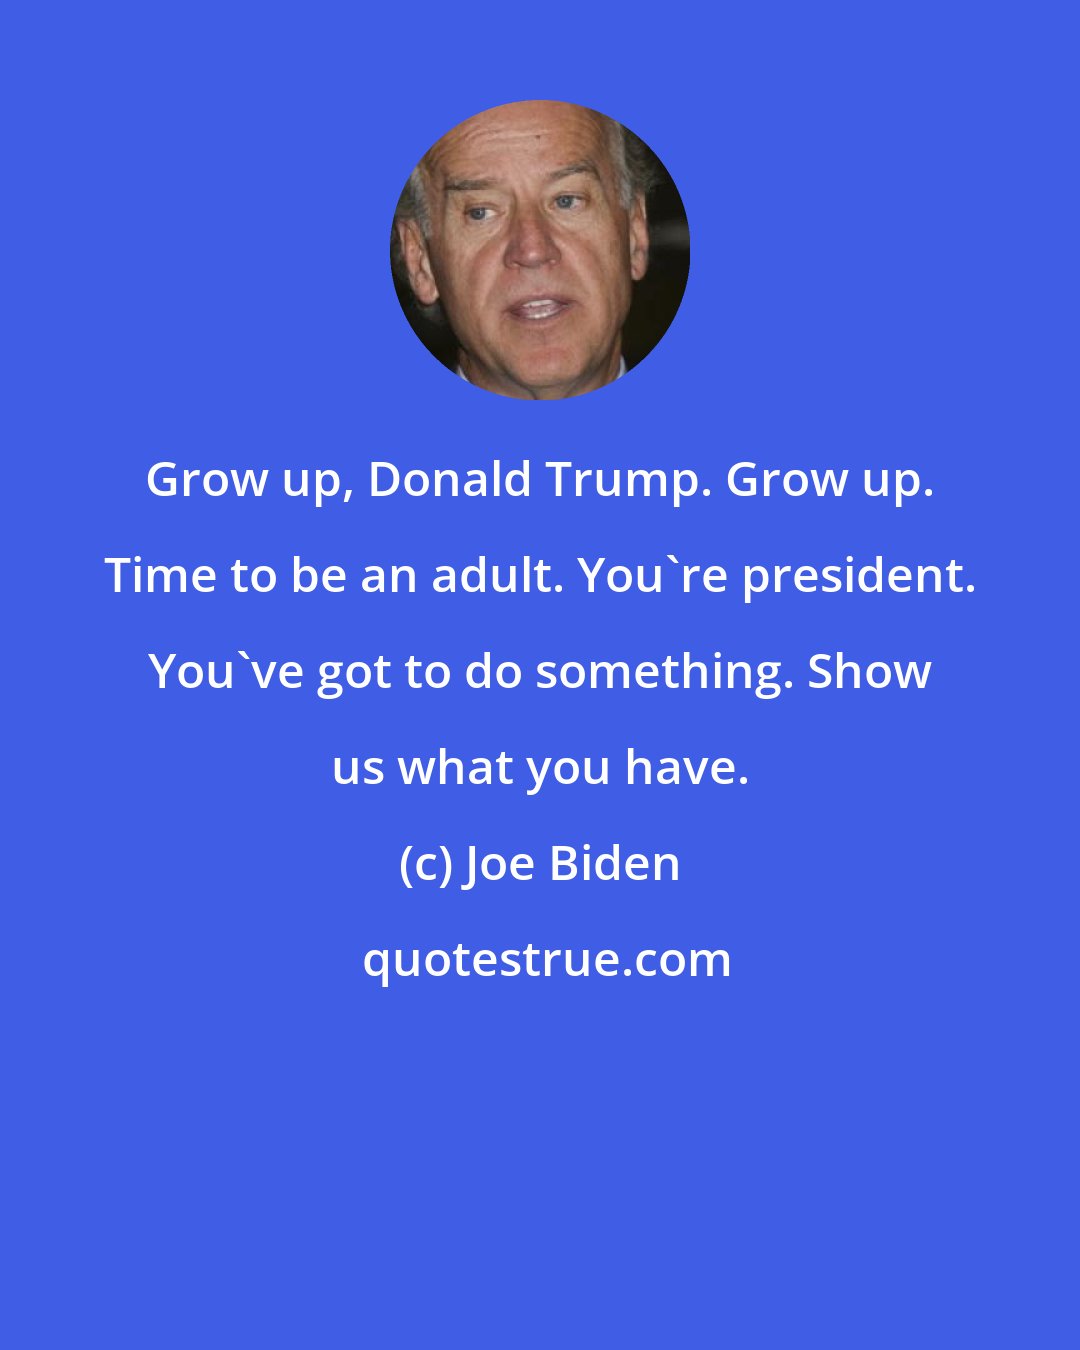 Joe Biden: Grow up, Donald Trump. Grow up. Time to be an adult. You're president. You've got to do something. Show us what you have.